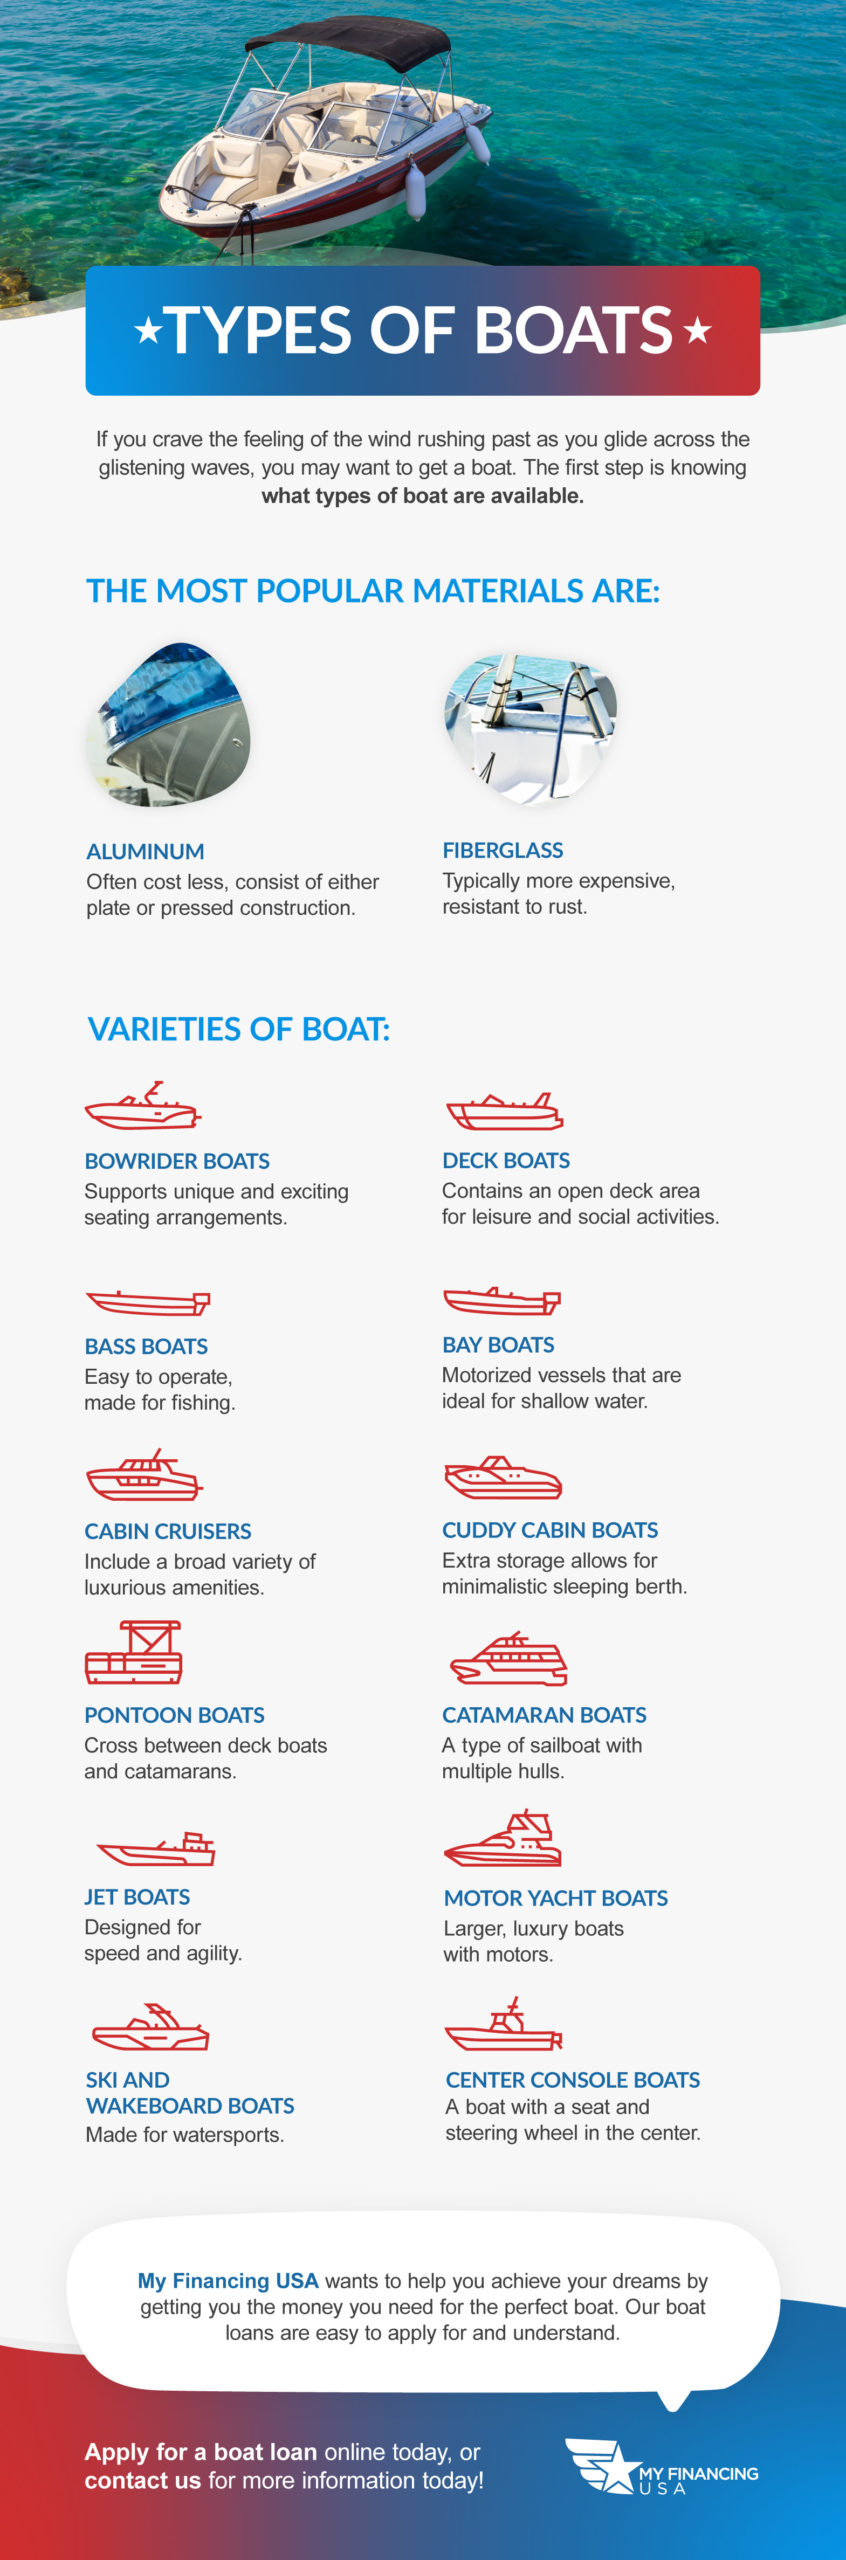 Types of Boats Micrographic